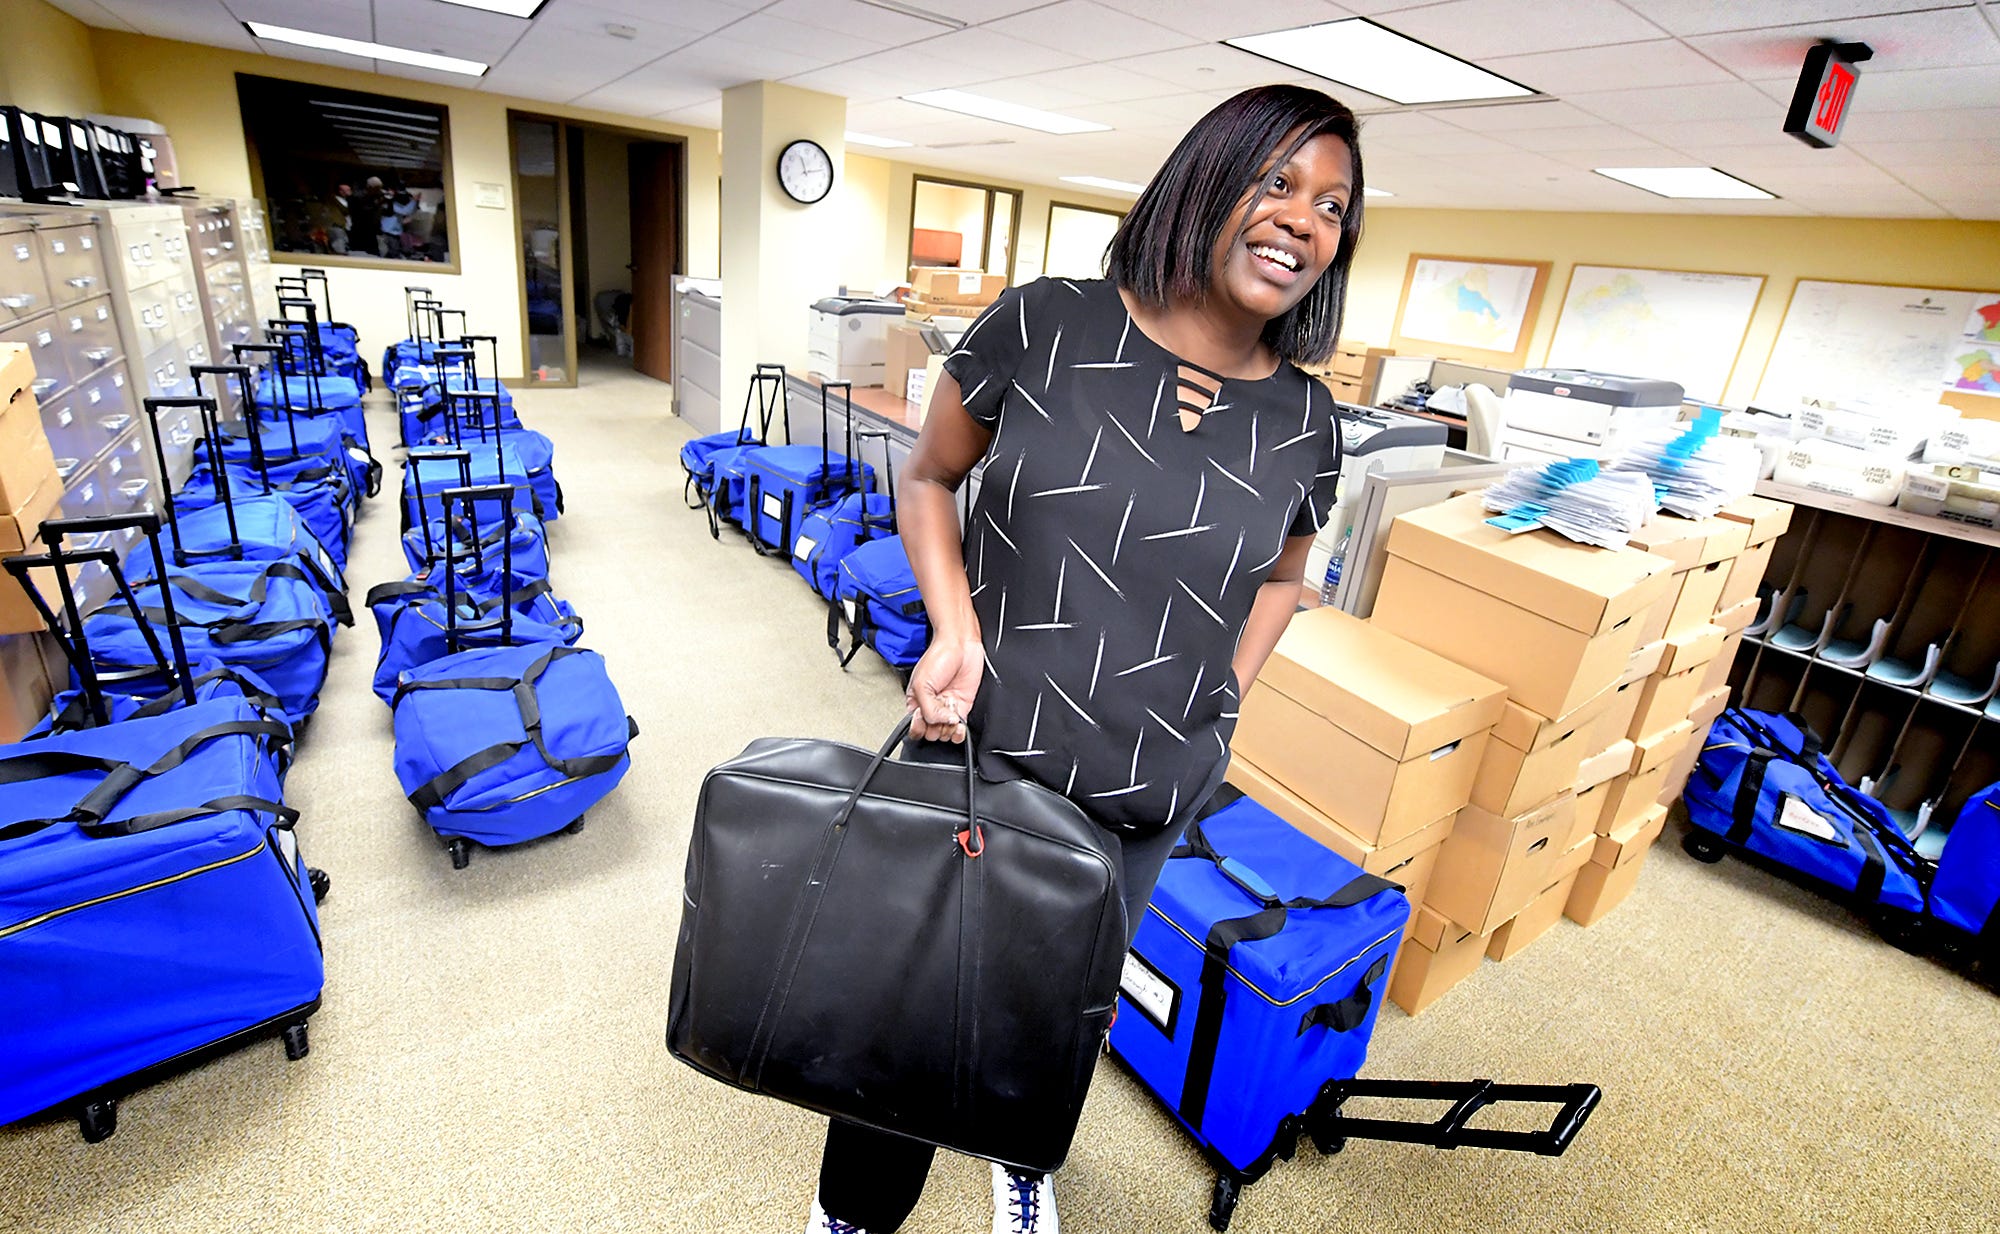 York County Elections and Voter Registration Director Nikki Suchanic holds a bag of ballots while standing amid cases loaded with them in the Elections Office at the York County Administrative Center Wednesday, November 6, 2019. Problems with the new voting procedures on Election Day required the ballots to be rescanned. Bill Kalina photo